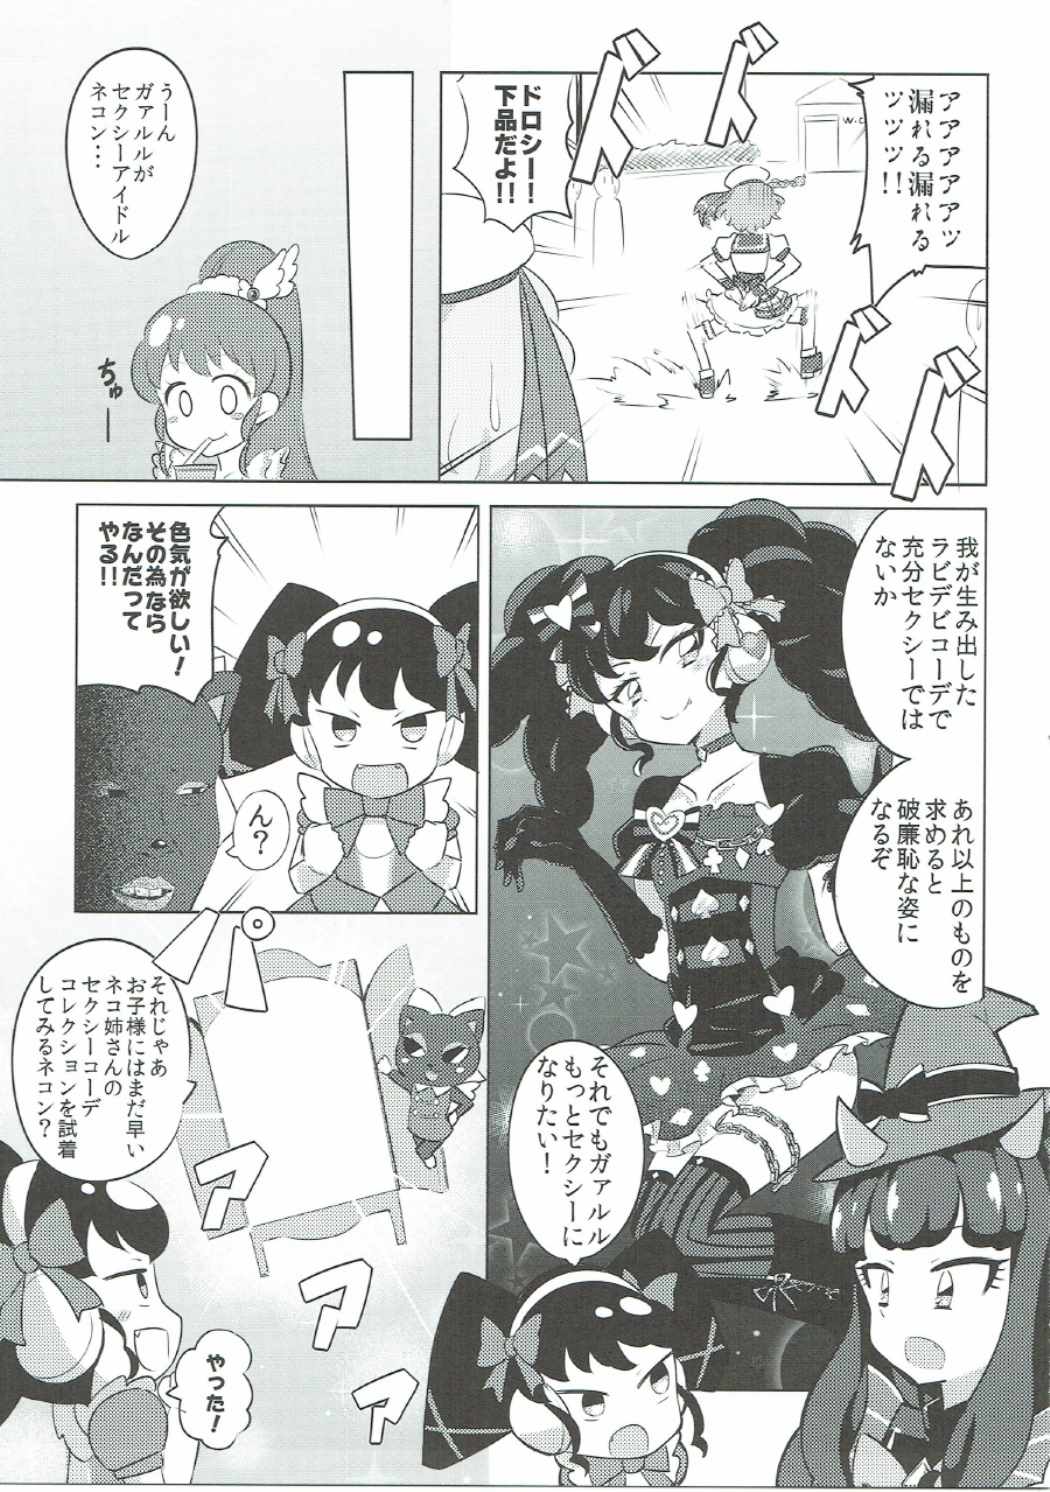 (On the Stage 5) [Gake no Ue no Aho (AHO)] The Gaarmagedon Times (PriPara) page 4 full